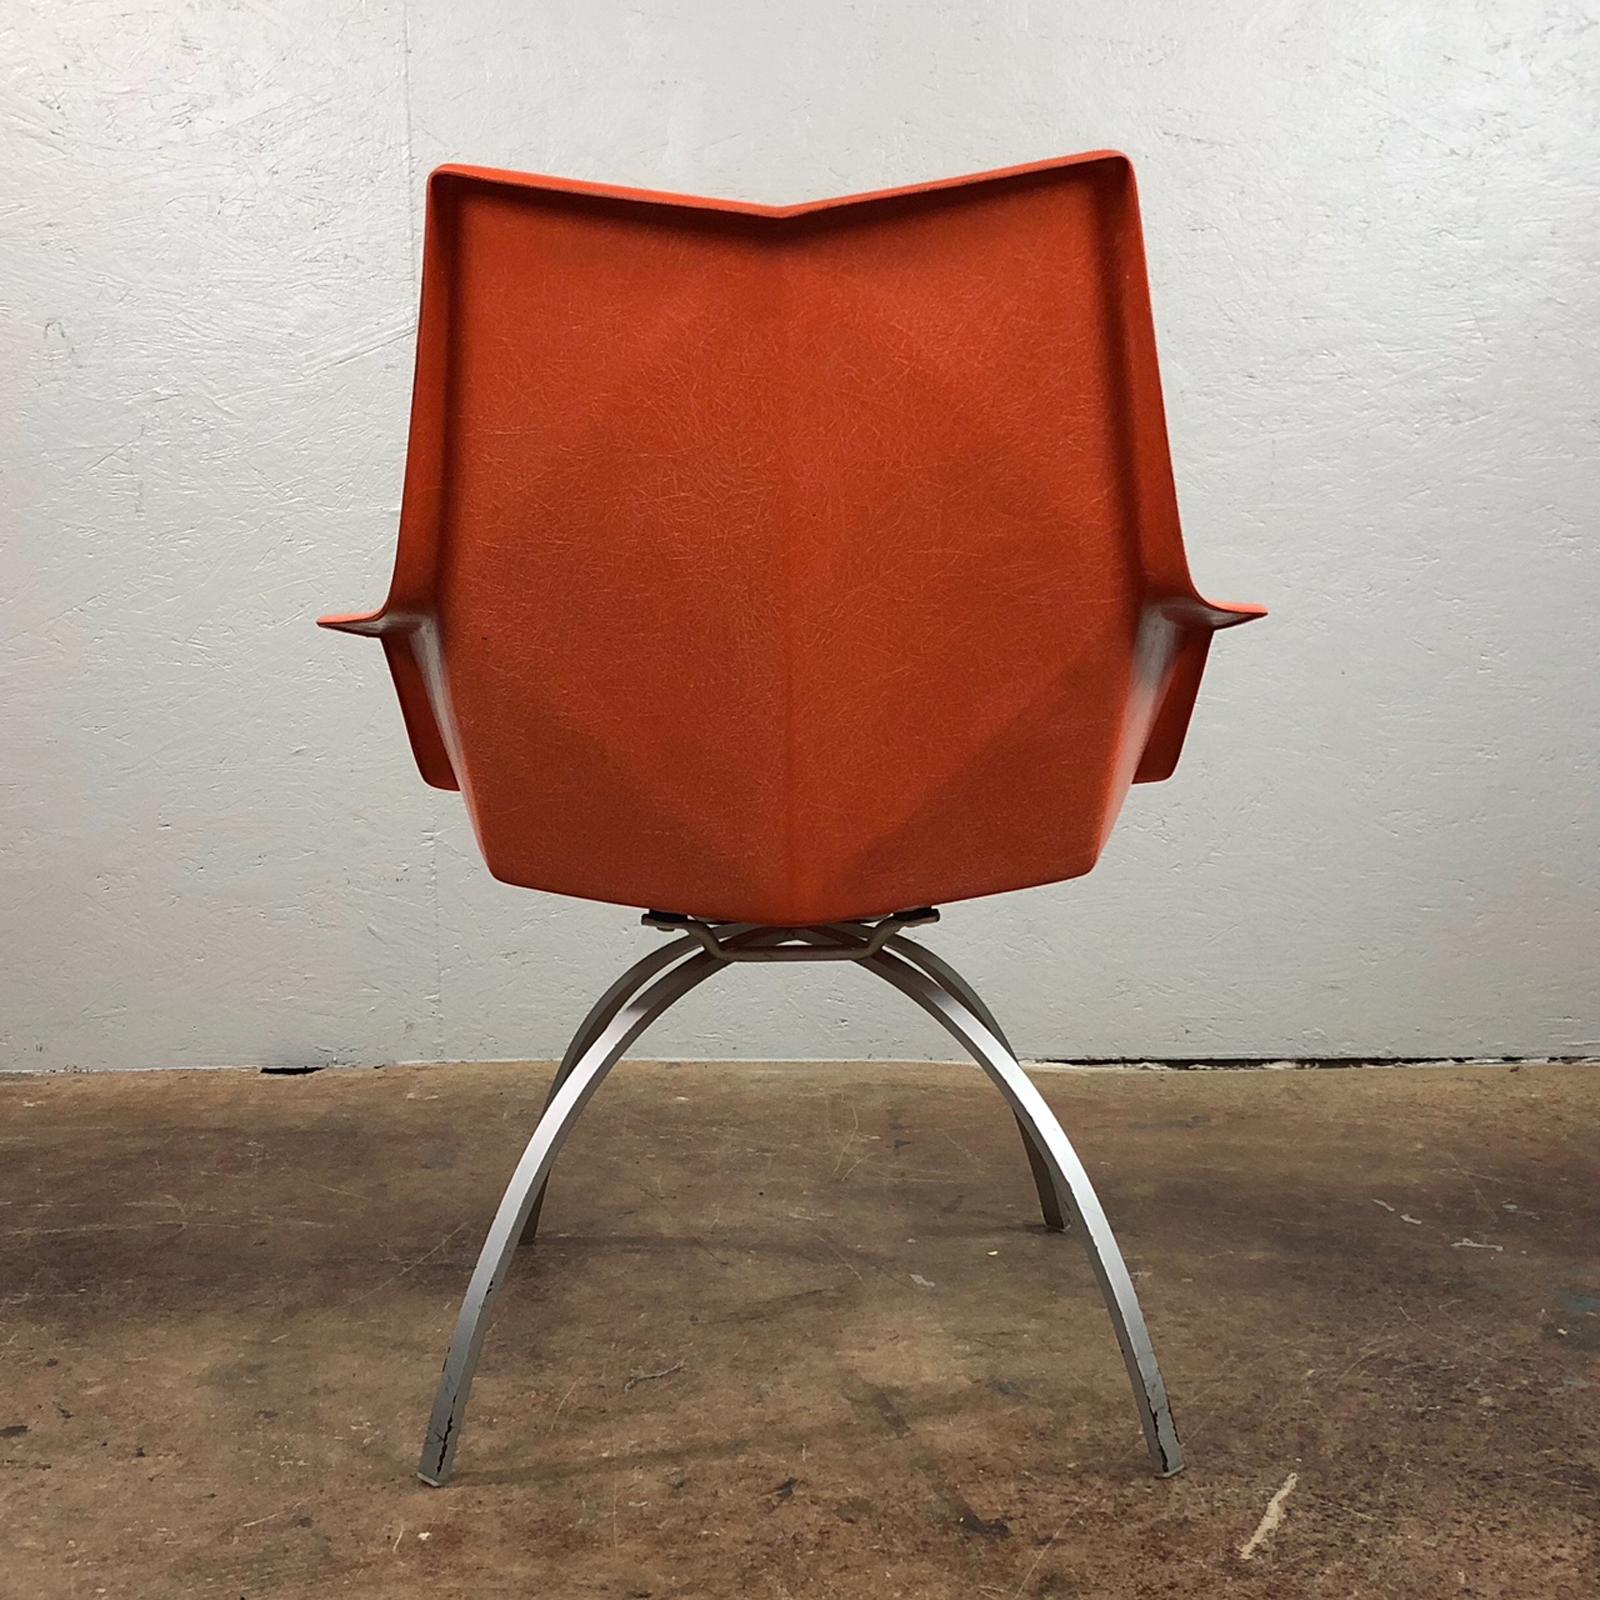 Rare 1960s original molded fiberglass Origami chair on a spider base by Paul McCobb.